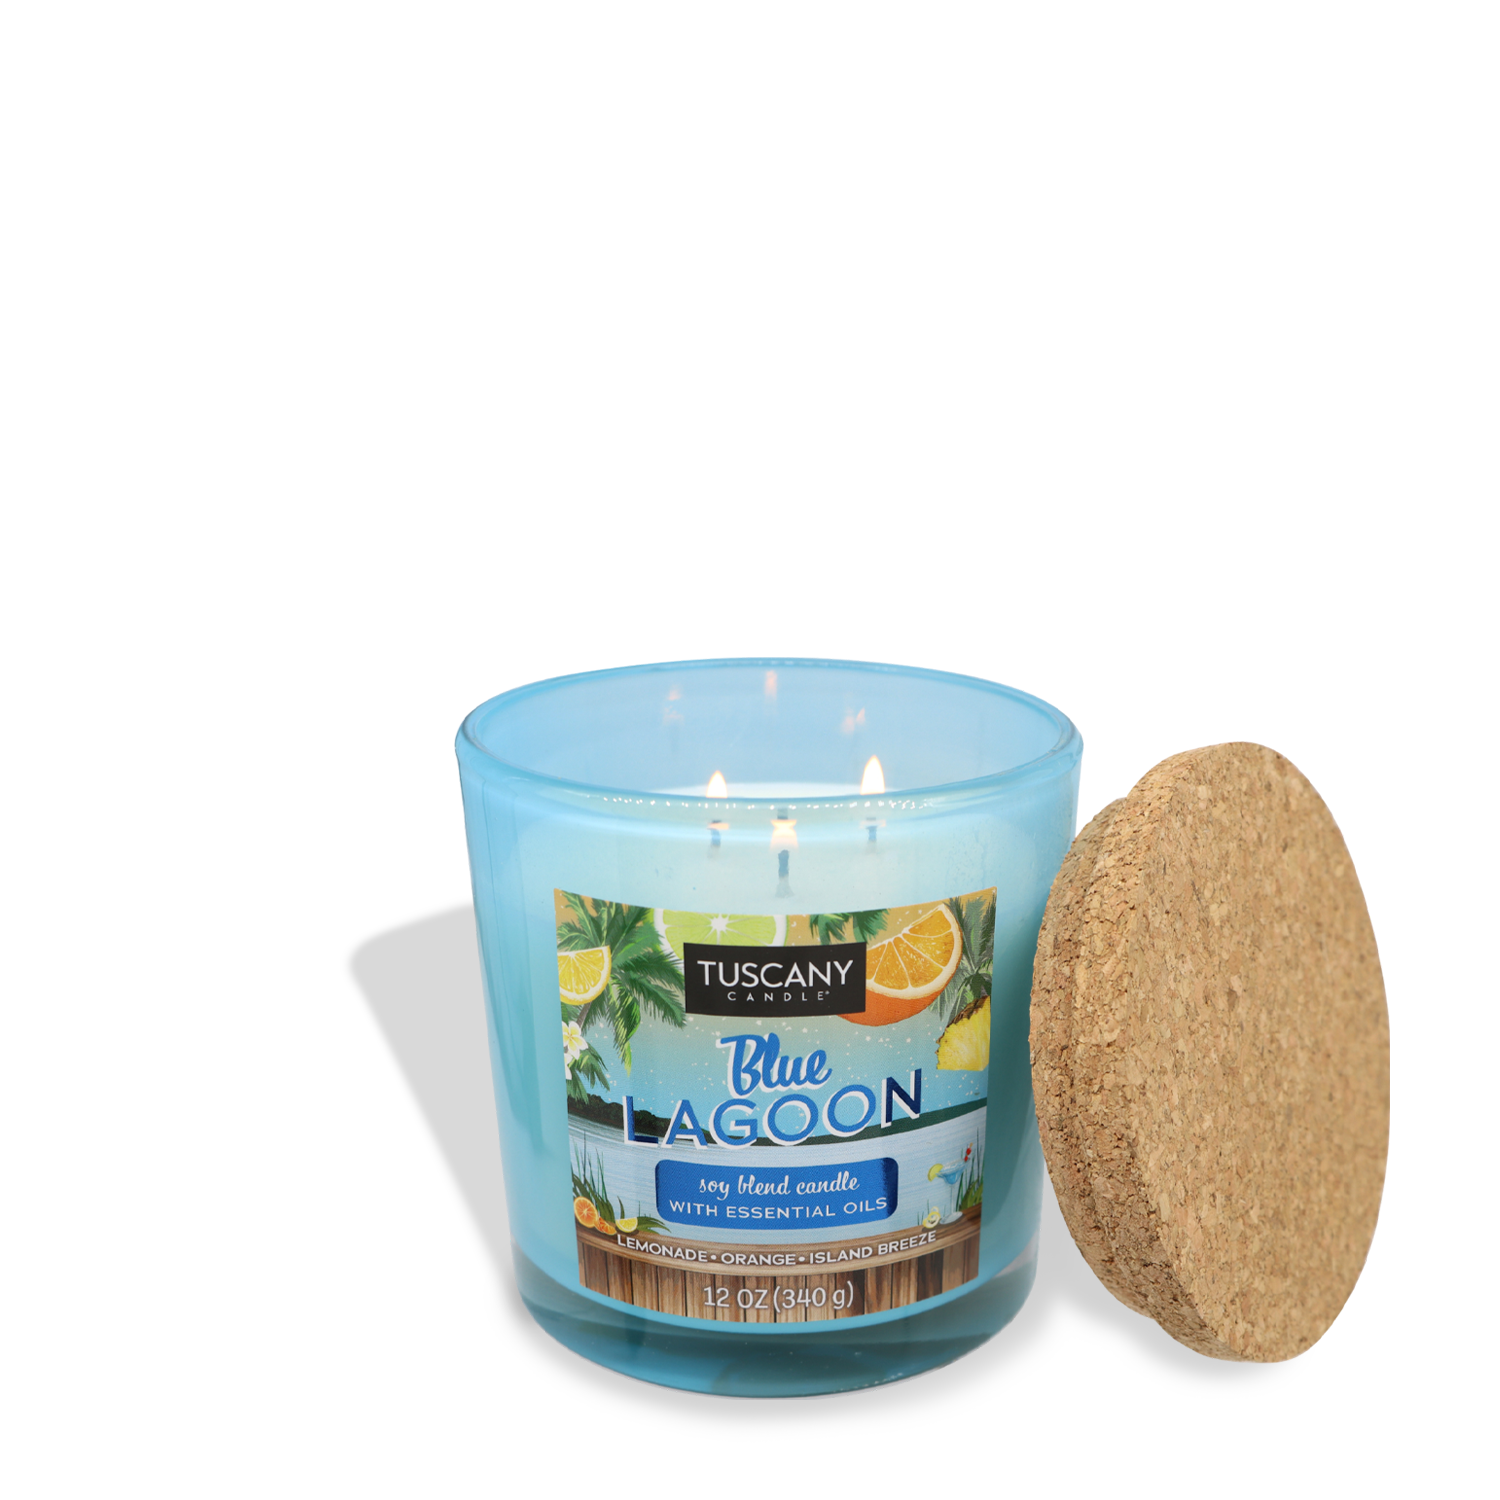 A light blue candle in a glass container labeled "Blue Lagoon (12 oz) – Sunset Beach Bar Collection" by Tuscany Candle® SEASONAL, infused with bright citrus essential oils, placed next to a cork lid. The candle is lit with three visible flames.